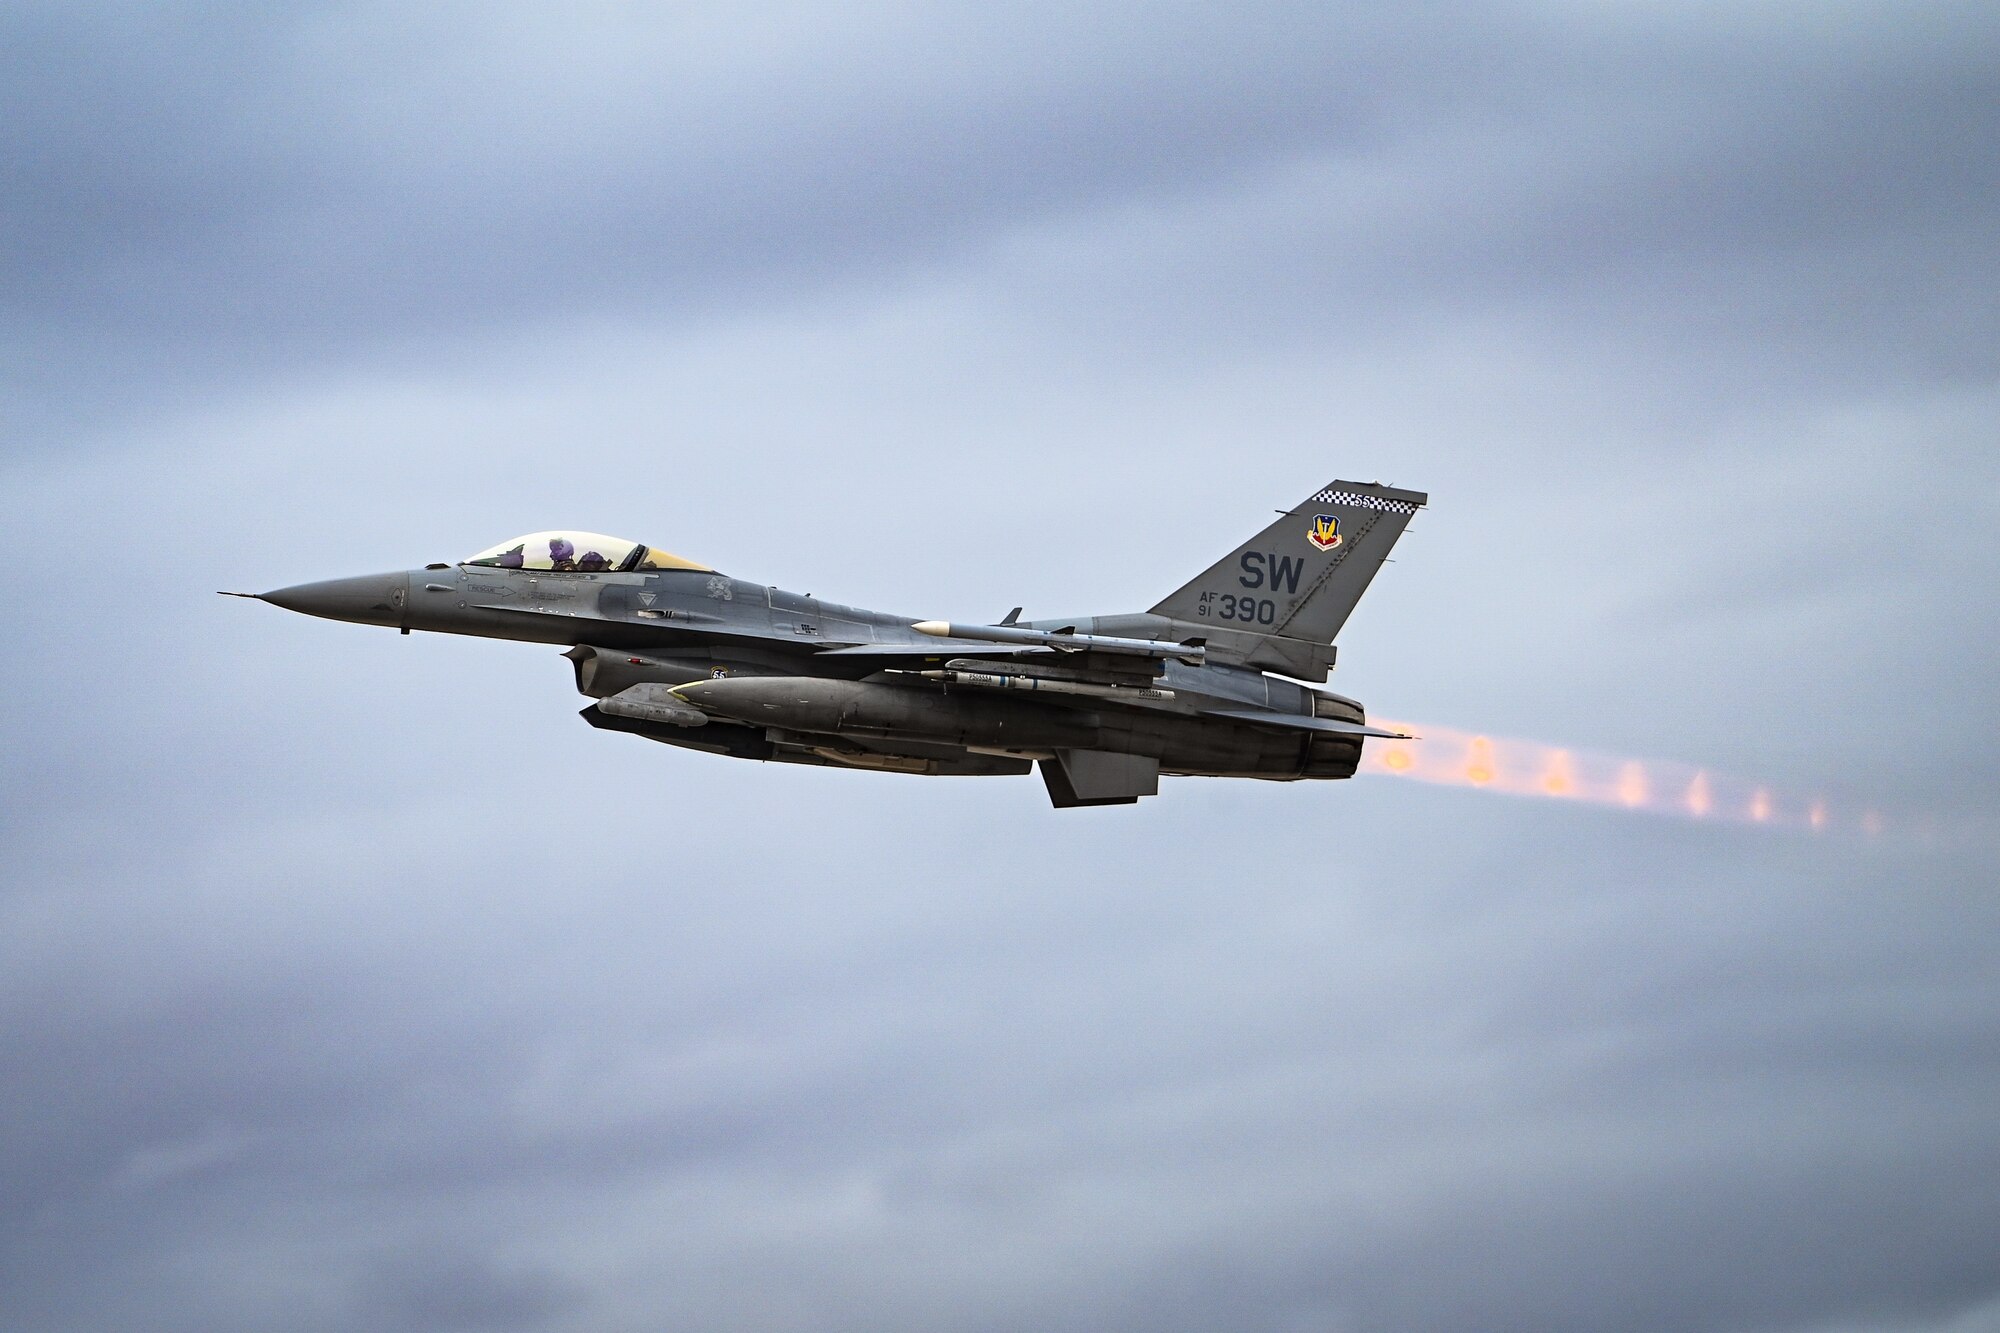 A U.S. Air Force F-16C Fighting Falcon assigned to the 55th Fighter Squadron at Shaw Air Force Base, S.C., takes off from the flightline during exercise Red Flag-Nellis (RF-N) 23-2 at Nellis Air Force Base, Nevada, March 14, 2023. Through dedicated training opportunities like RF-N 23-2, Wild Weasels ensure combat readiness and the tactical proficiency needed to maintain a ready force capable of ensuring the collective defense of the United States, their partners and allies. (U.S. Air Force photo by Staff Sgt. Madeline Herzog)